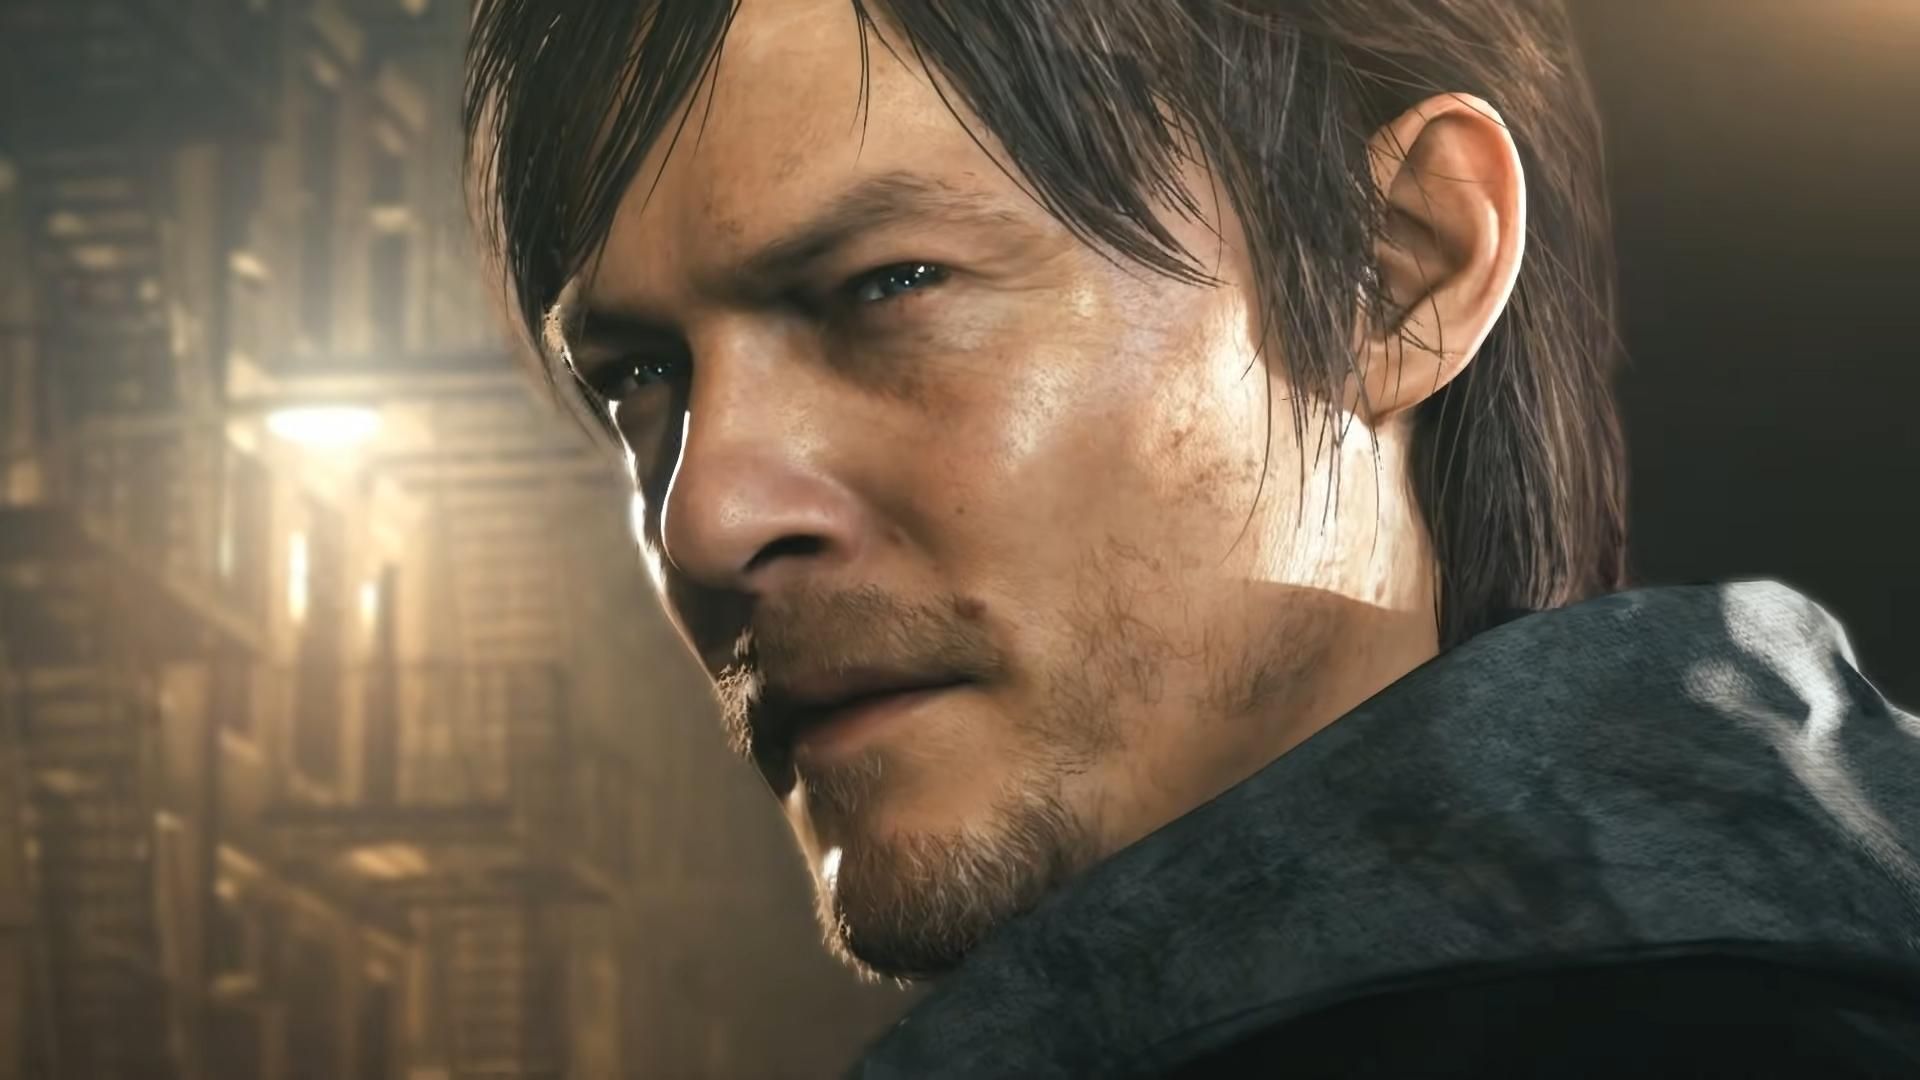 UPDATE: It's Official, Silent Hills Is No More